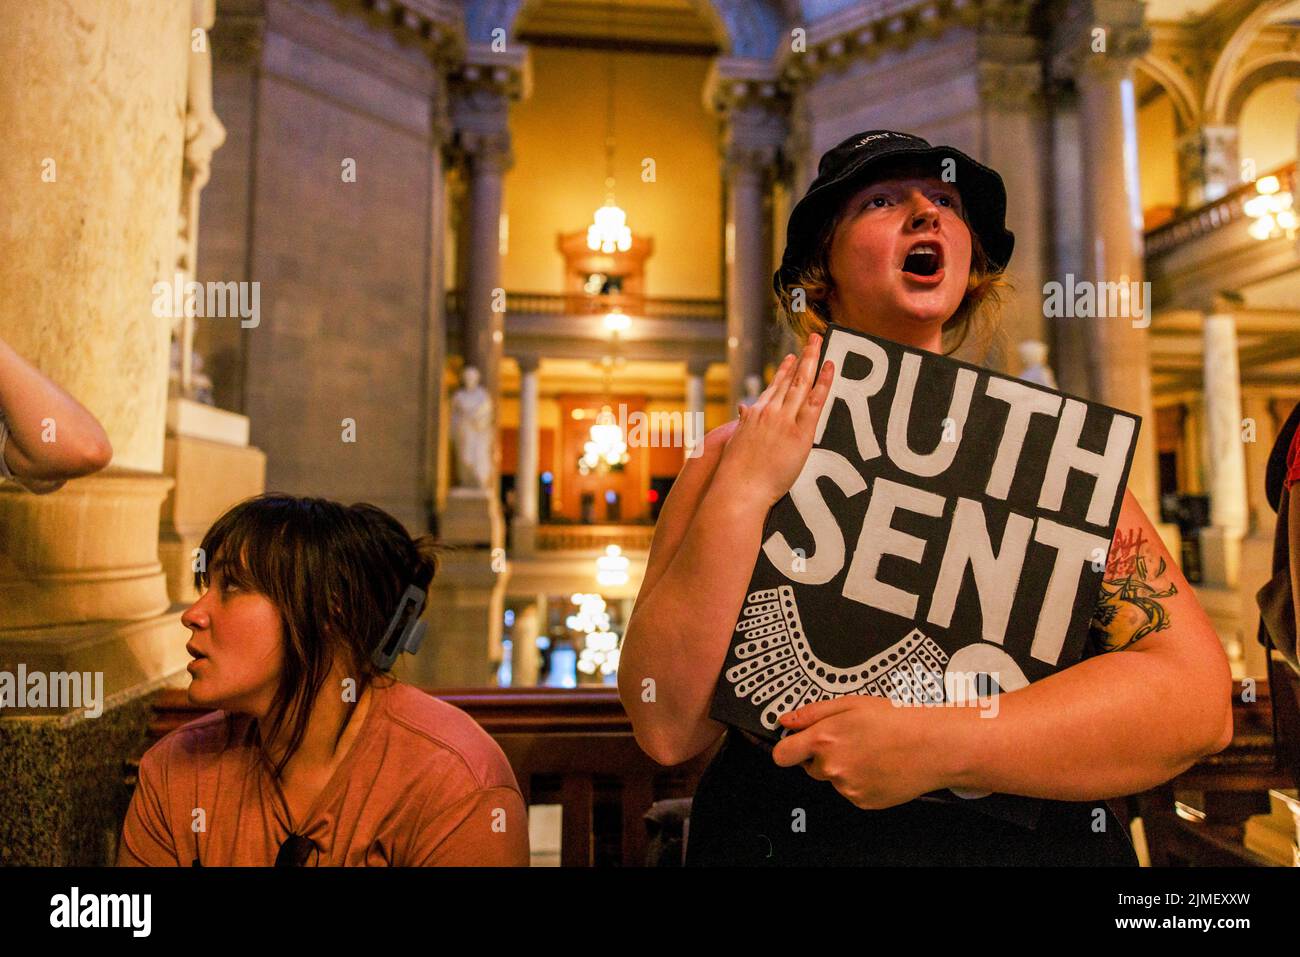 Abortion rights activists protest as the Indiana Senate debates before voting to ban abortion during a special session in Indianapolis. The legislature held a special session to ban abortion rights in the wake of the U.S. Supreme Court ruling overturning Roe v. Wade in June. Holcomb signed the bill into law. Stock Photo